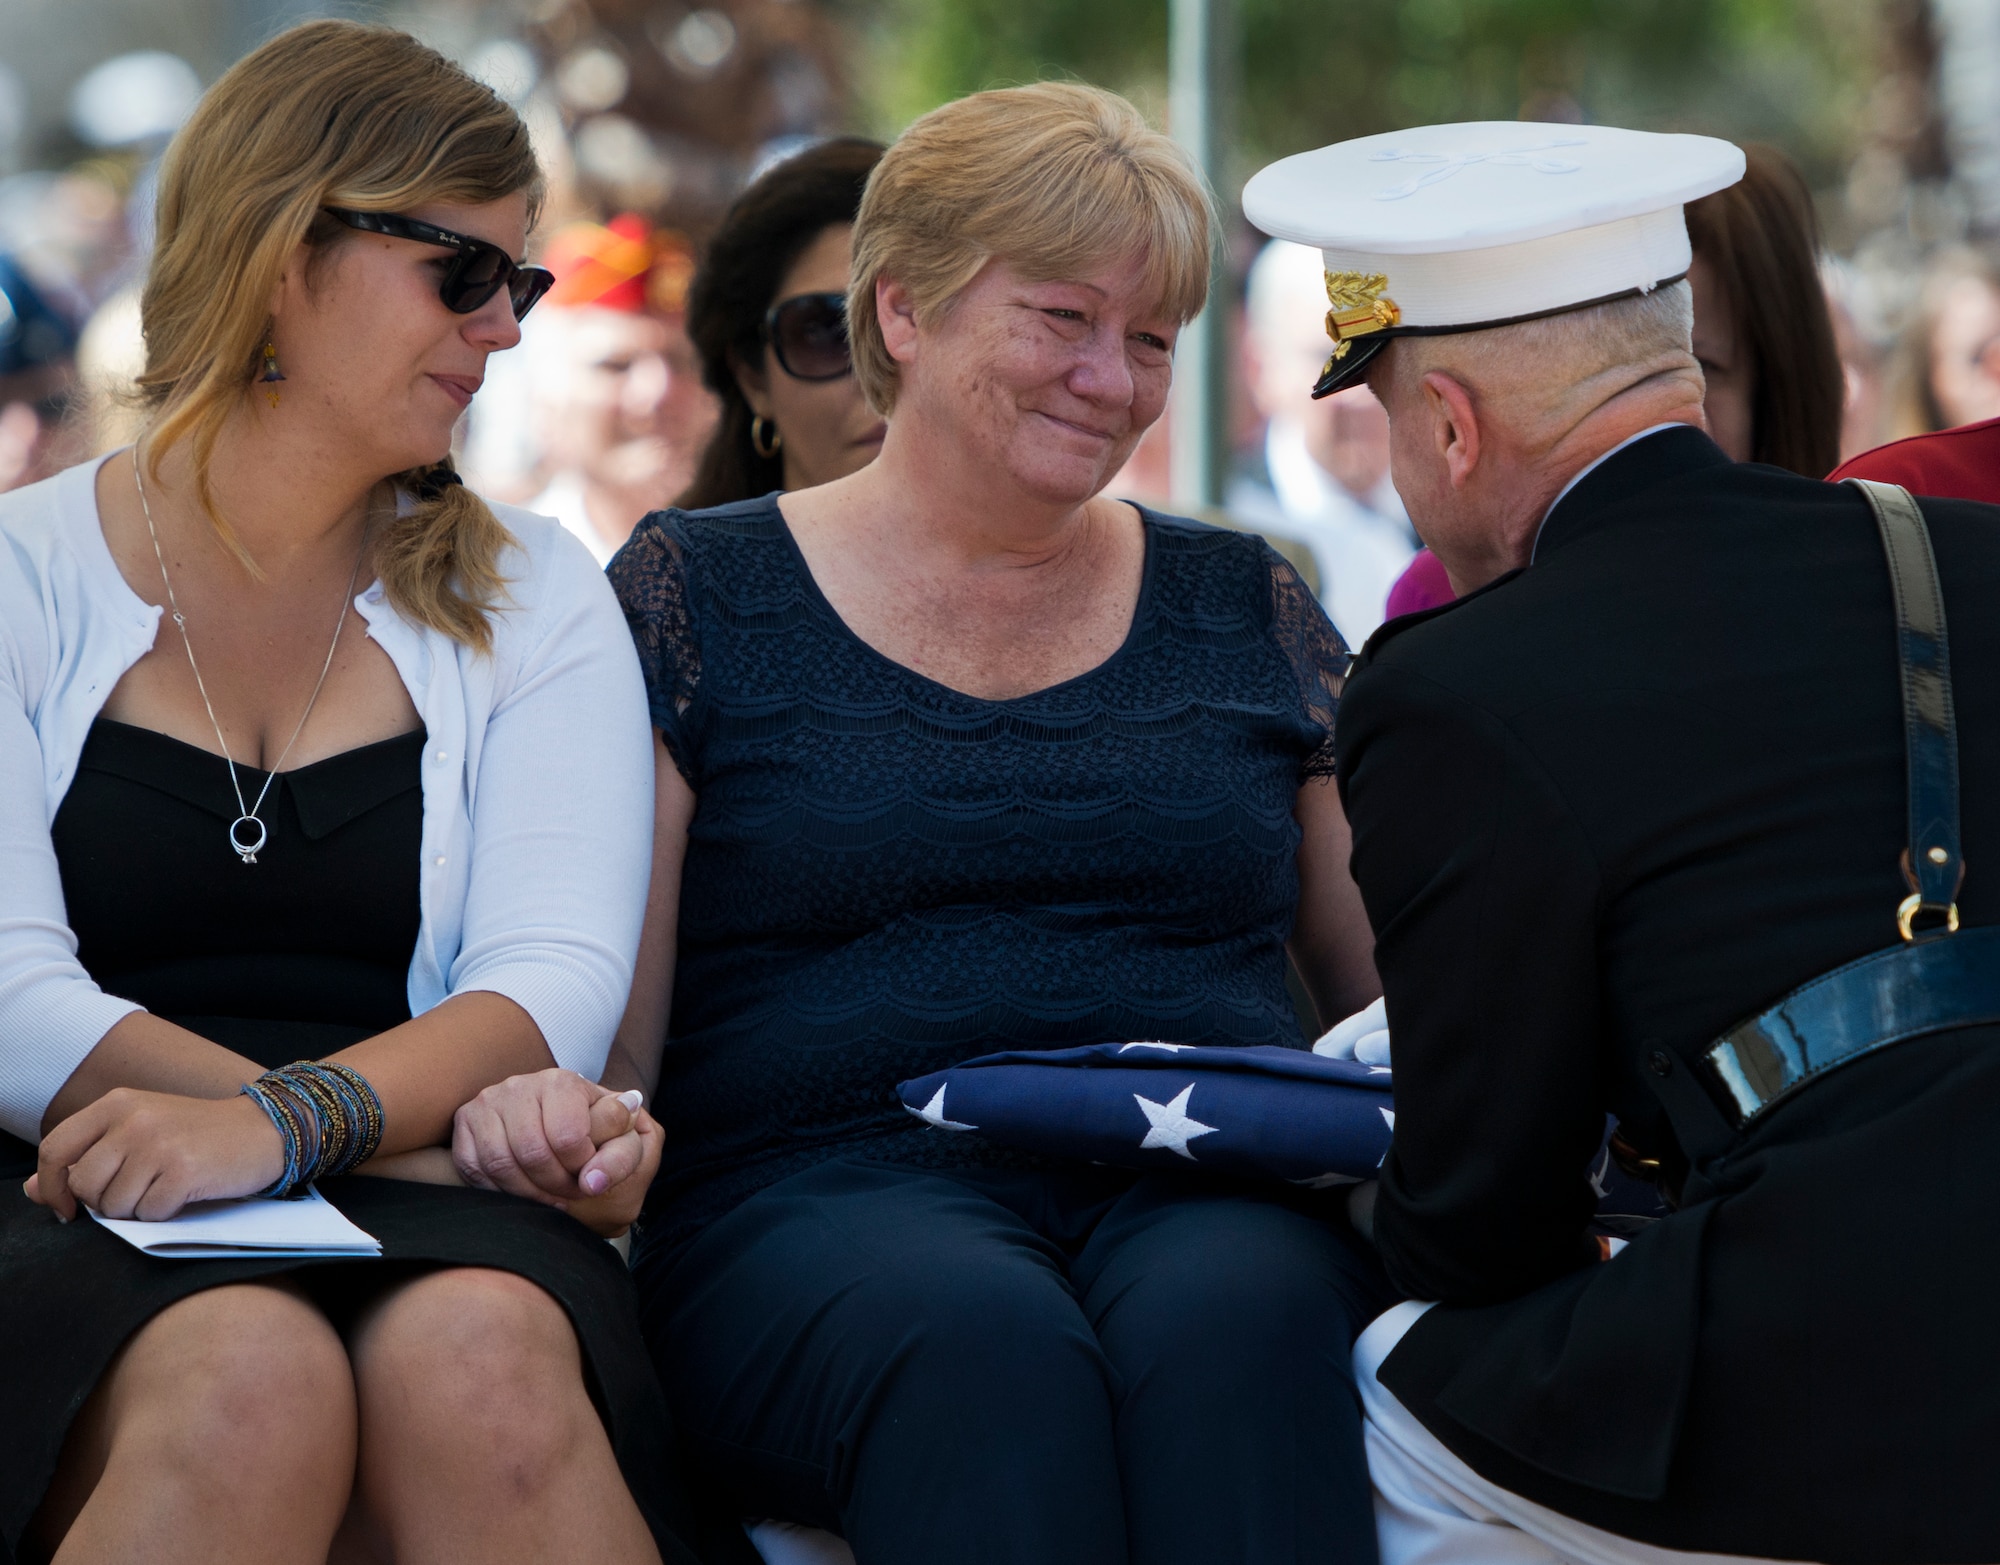 Monica Marsh, mother of Staff Sgt. Mathew Marsh, listens to Marine Corps Commandant Gen. Jim Amos during the 45th Annual Explosive Ordnance Disposal Memorial Ceremony May 3, at Eglin Air Force Base, Fla. Eight new names of Army and Marine EOD technicians, who lost their lives, were added to the Memorial Wall this year.  The all-service total now stands at 306. (U.S. Air Force photo/Tech. Sgt. Sam King)